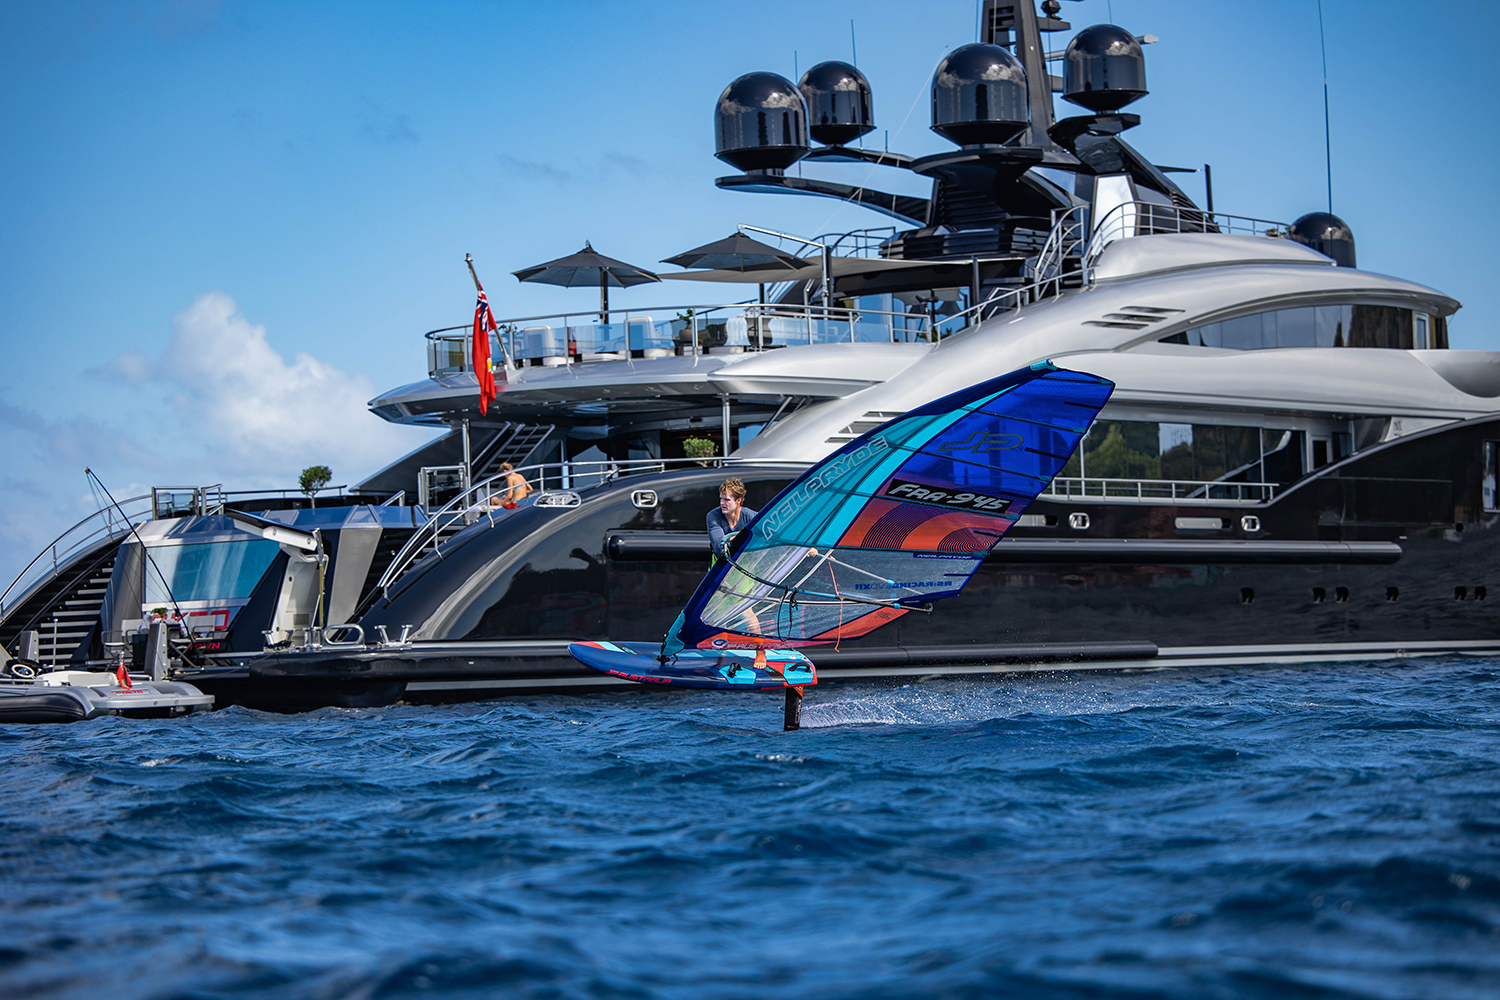 Foil action and luxury yachts